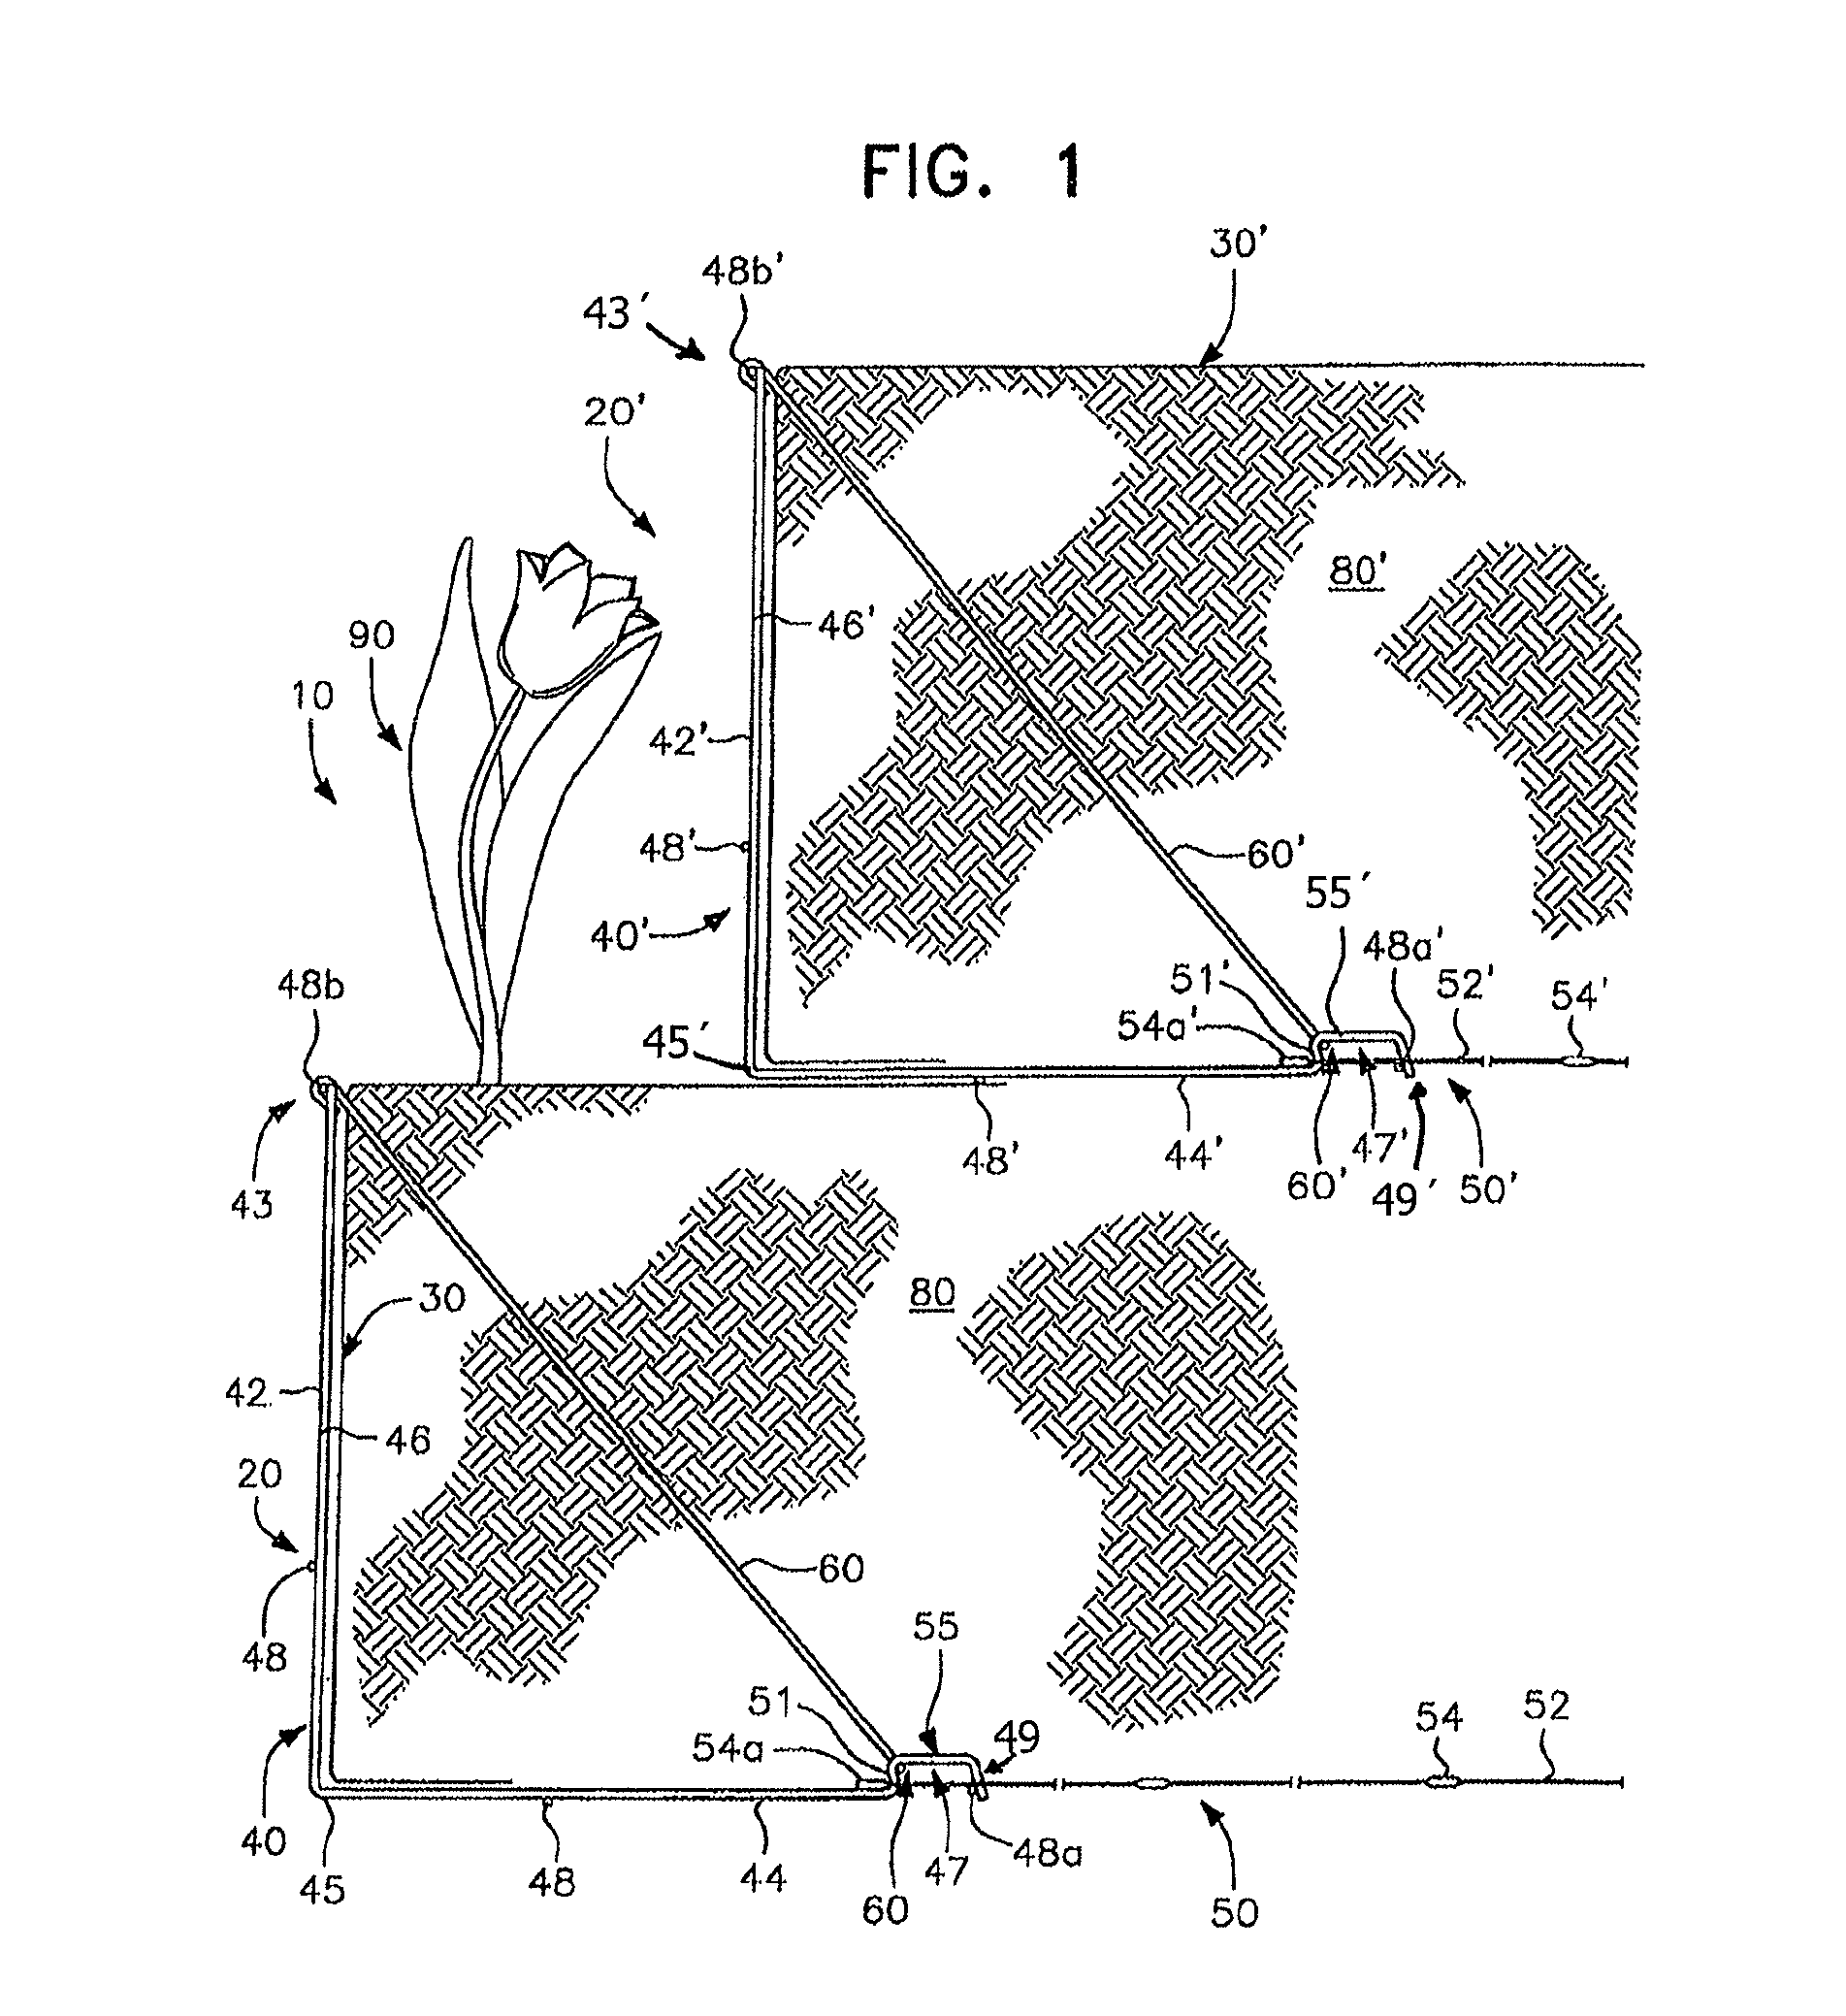 Combined strut and connector retaining wall system and method therefor